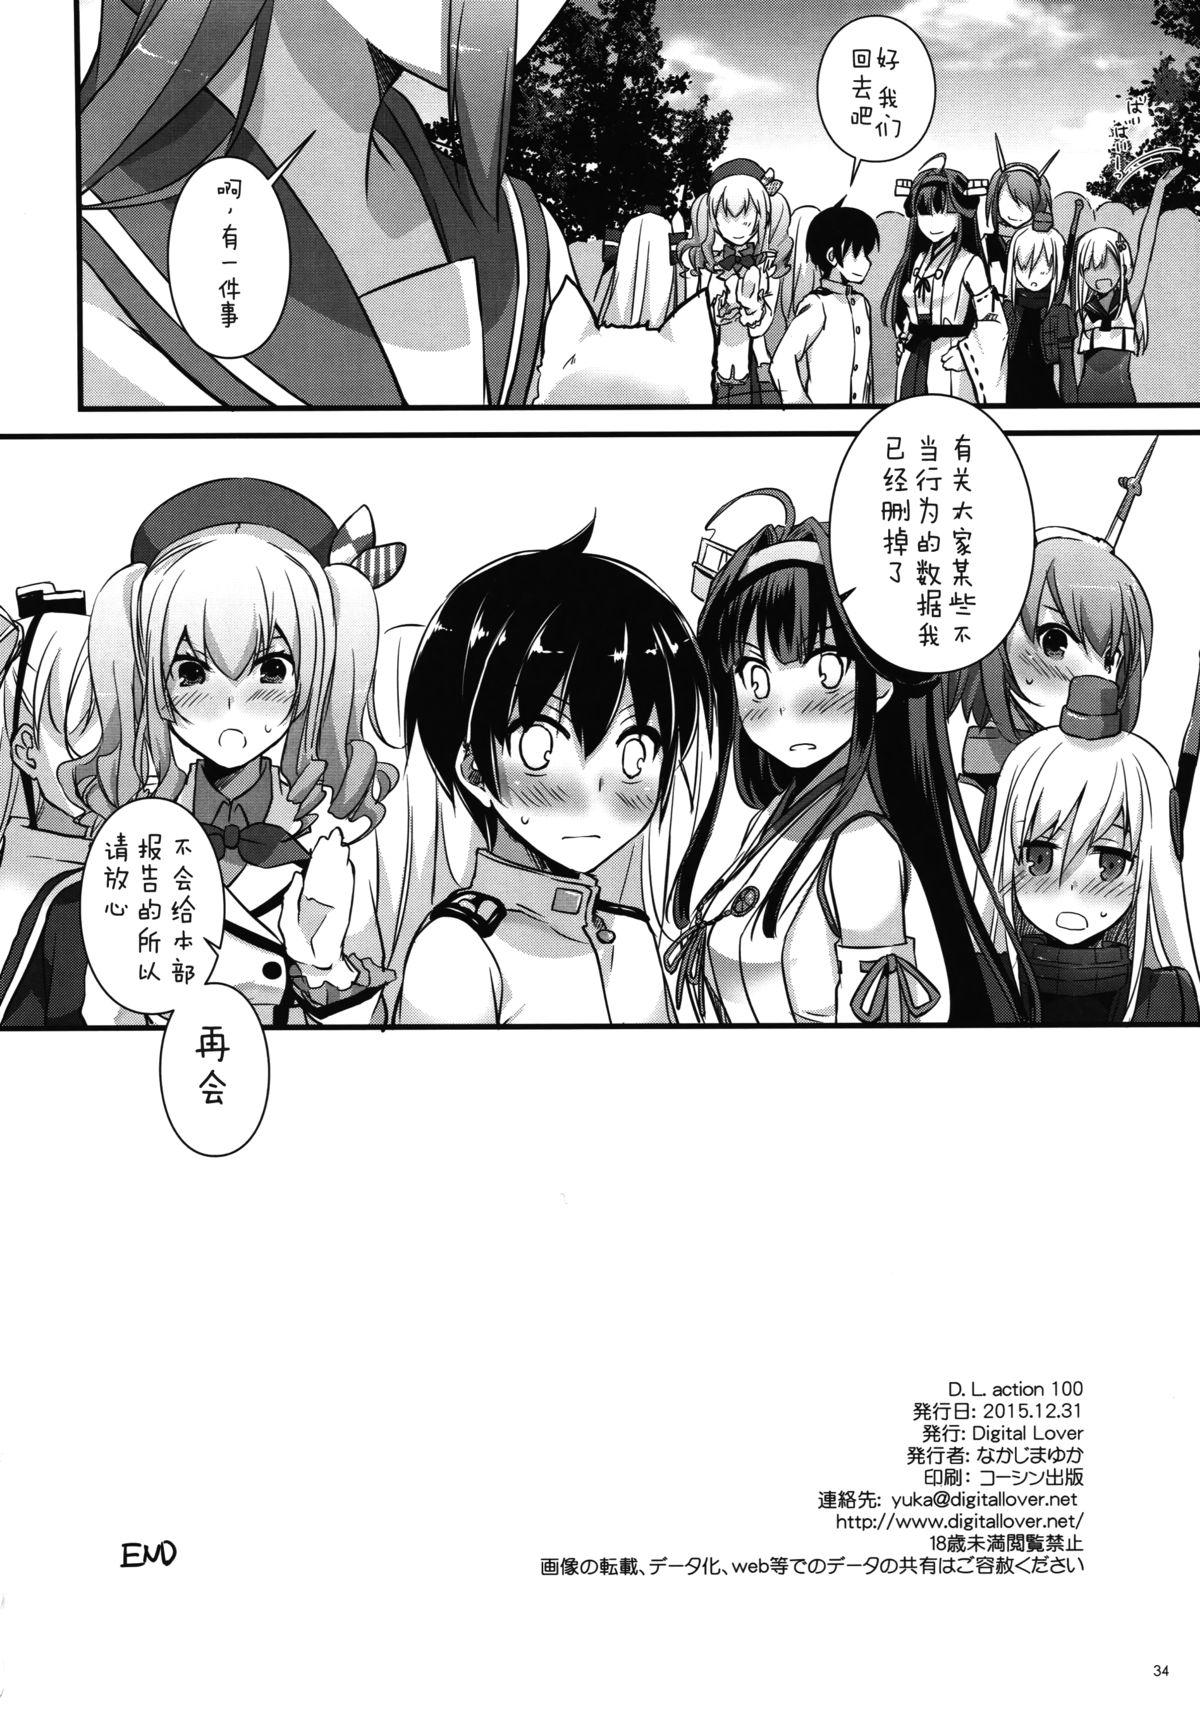 Tiny D.L. action 100 - Kantai collection  - Page 34